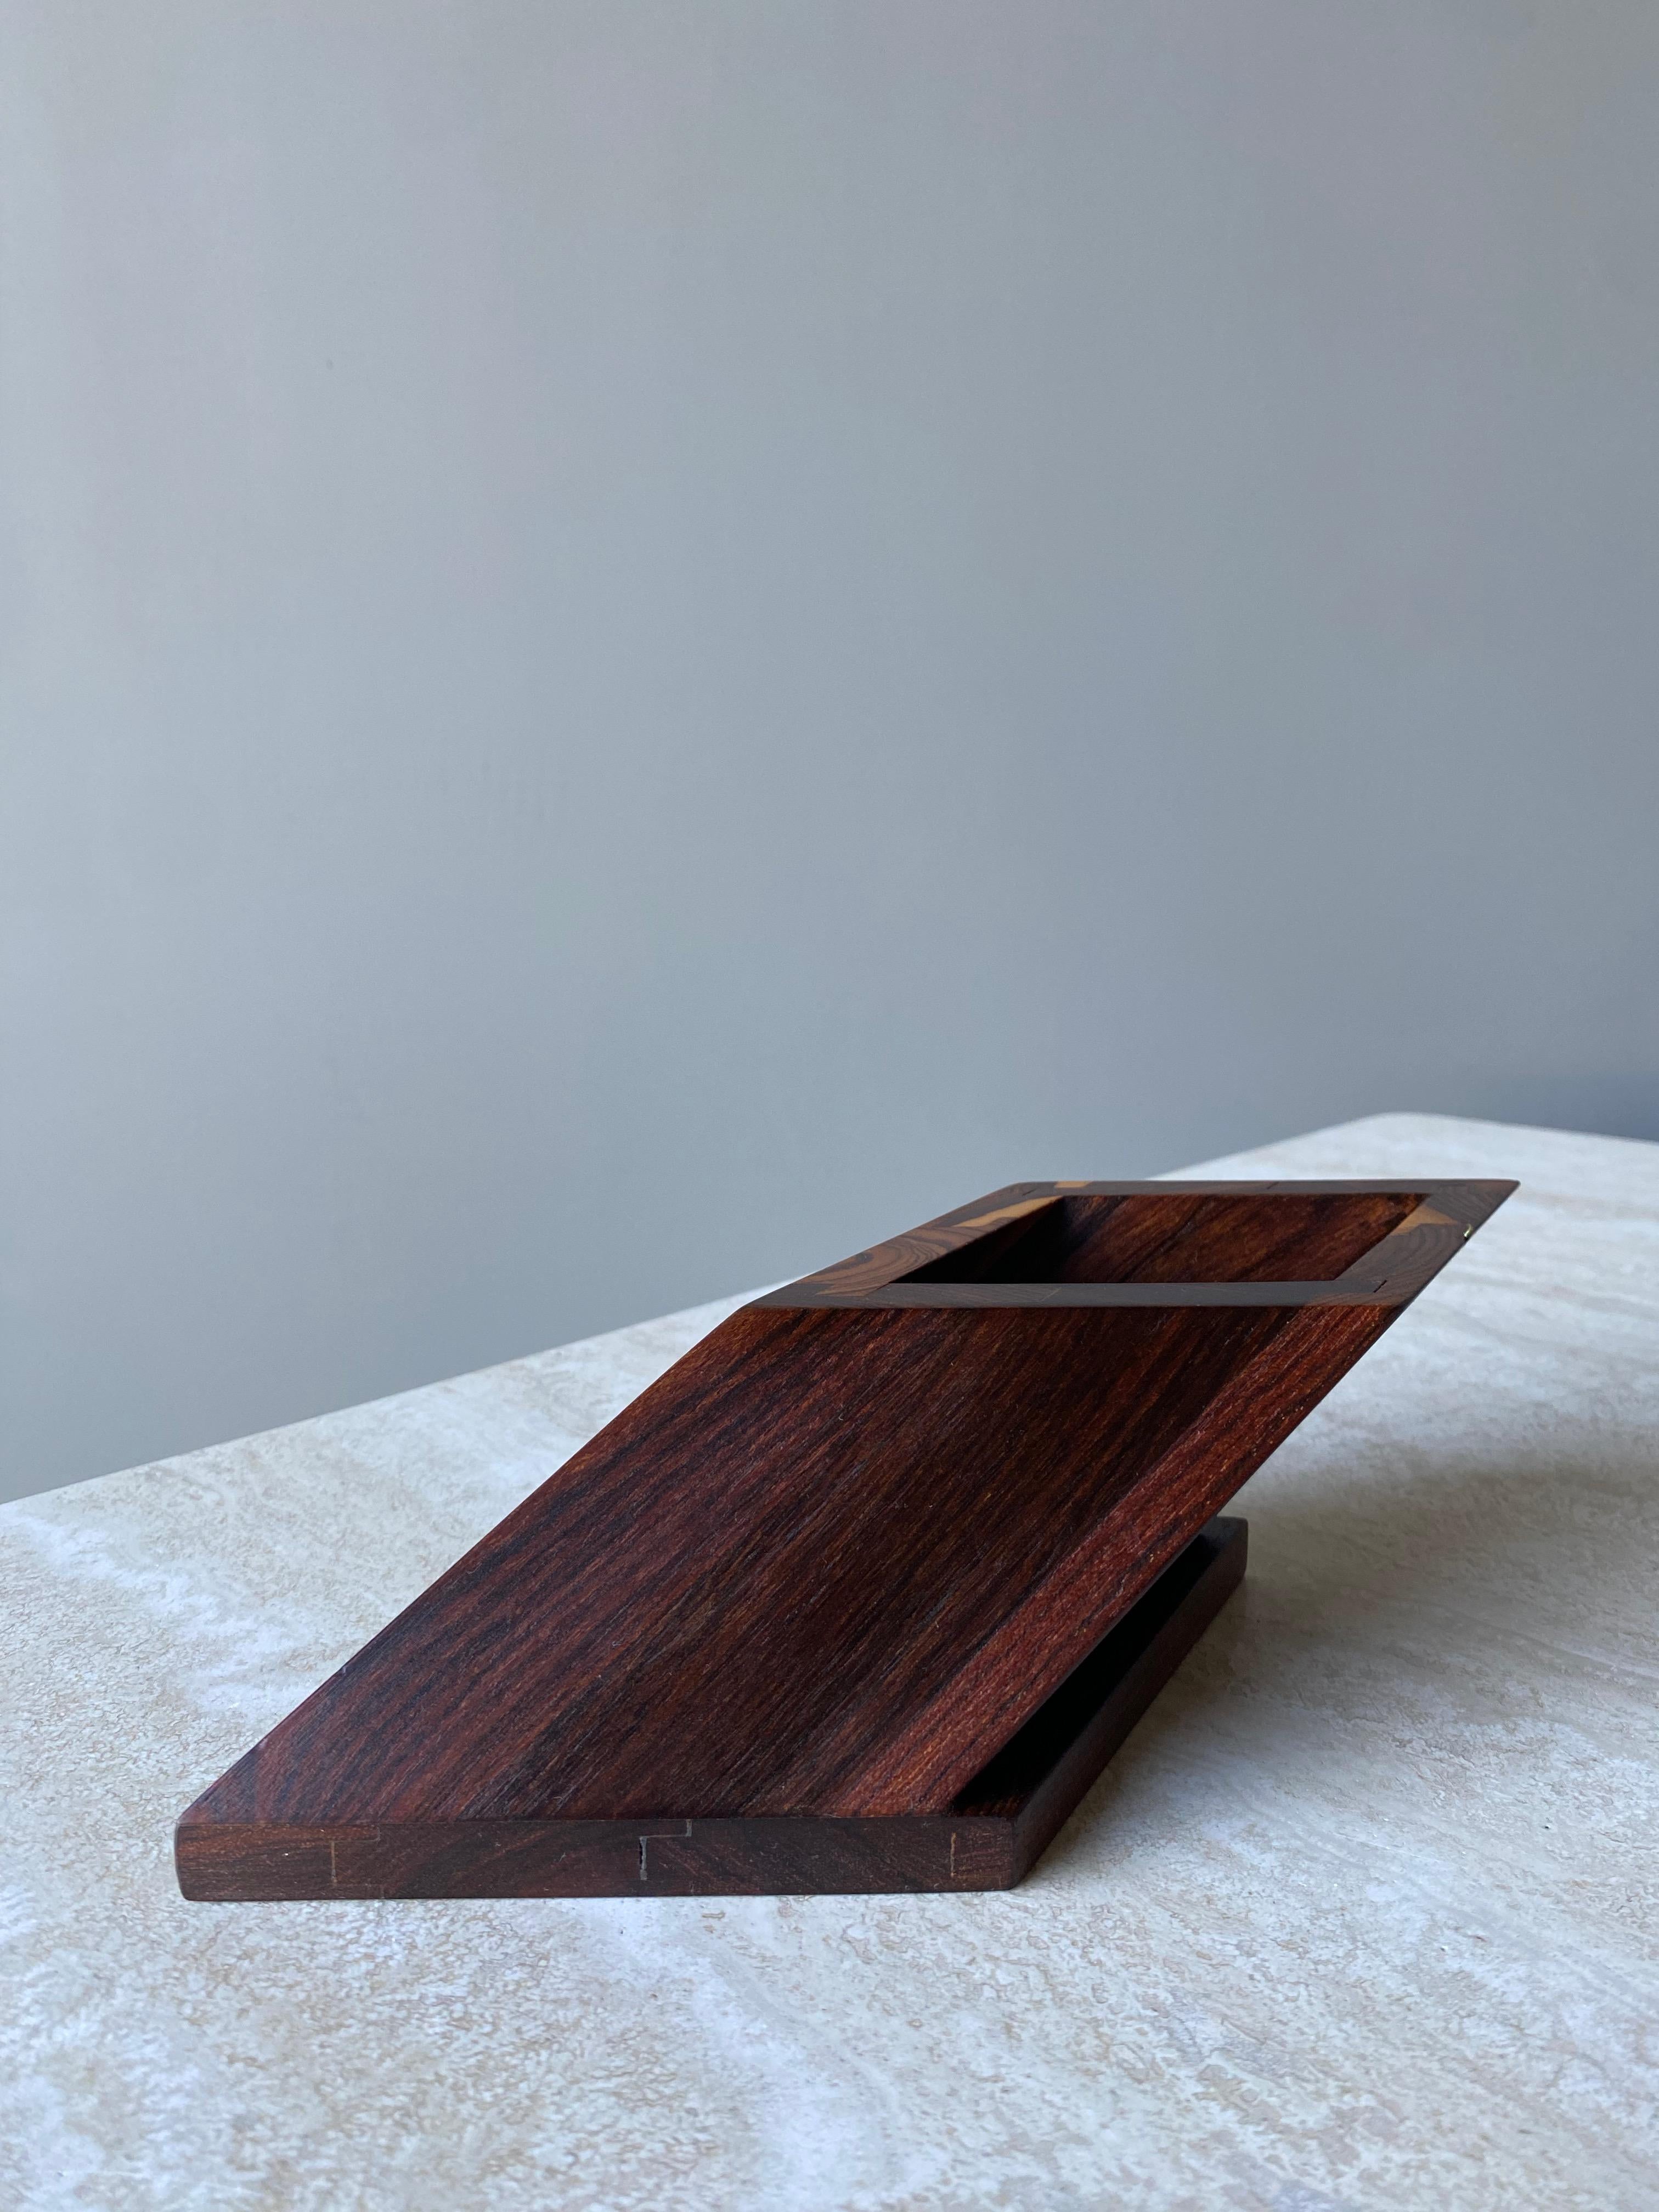 20th Century Don Shoemaker Cocobolo Pencil Holder for Señal, Mexico, 1980s For Sale